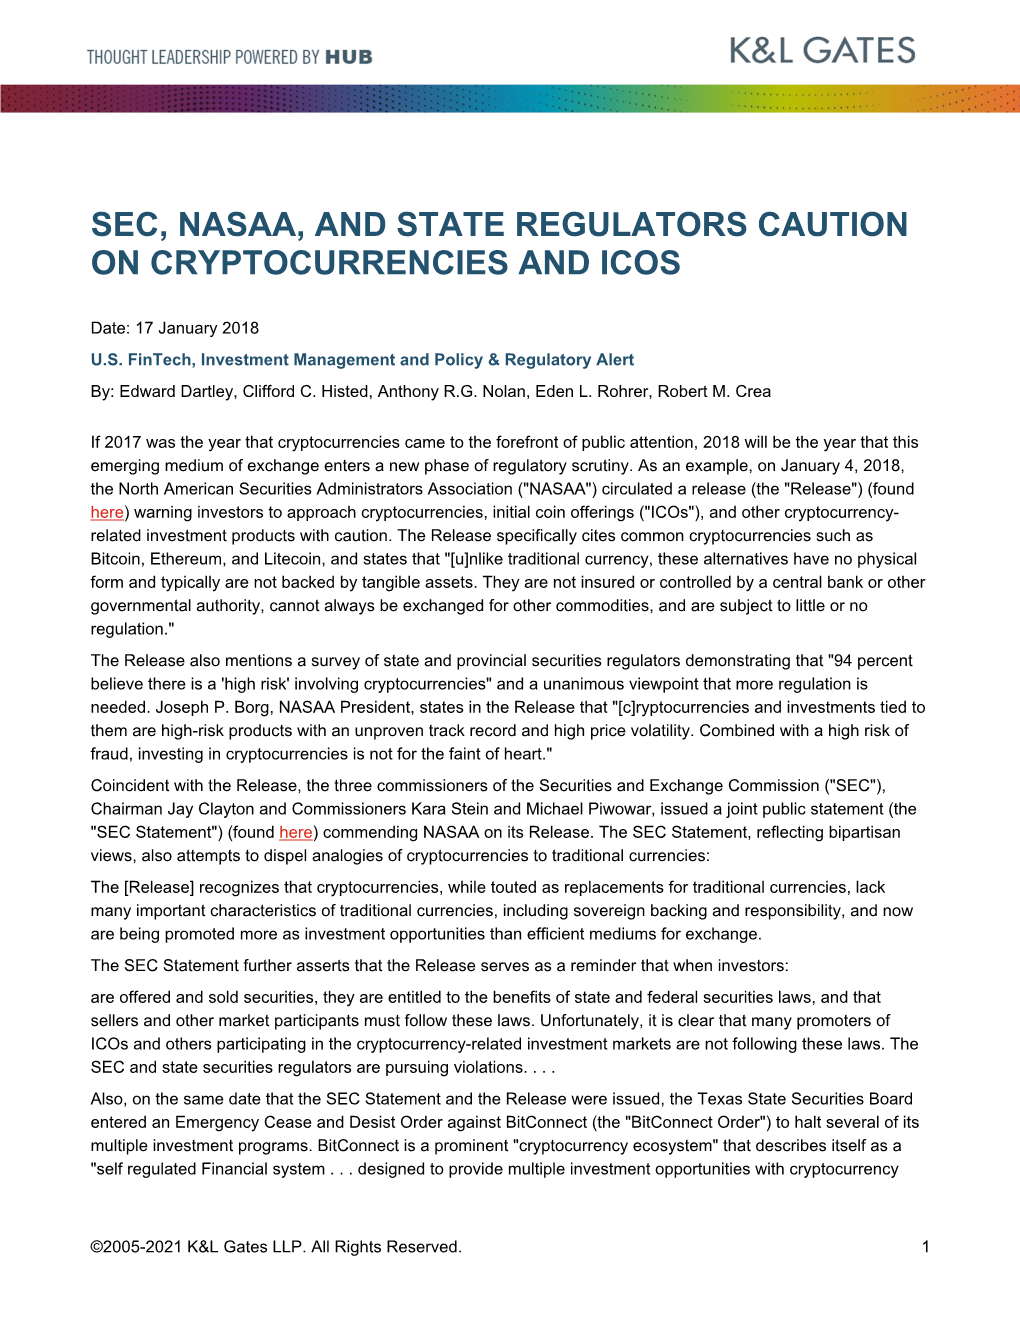 Sec, Nasaa, and State Regulators Caution on Cryptocurrencies and Icos